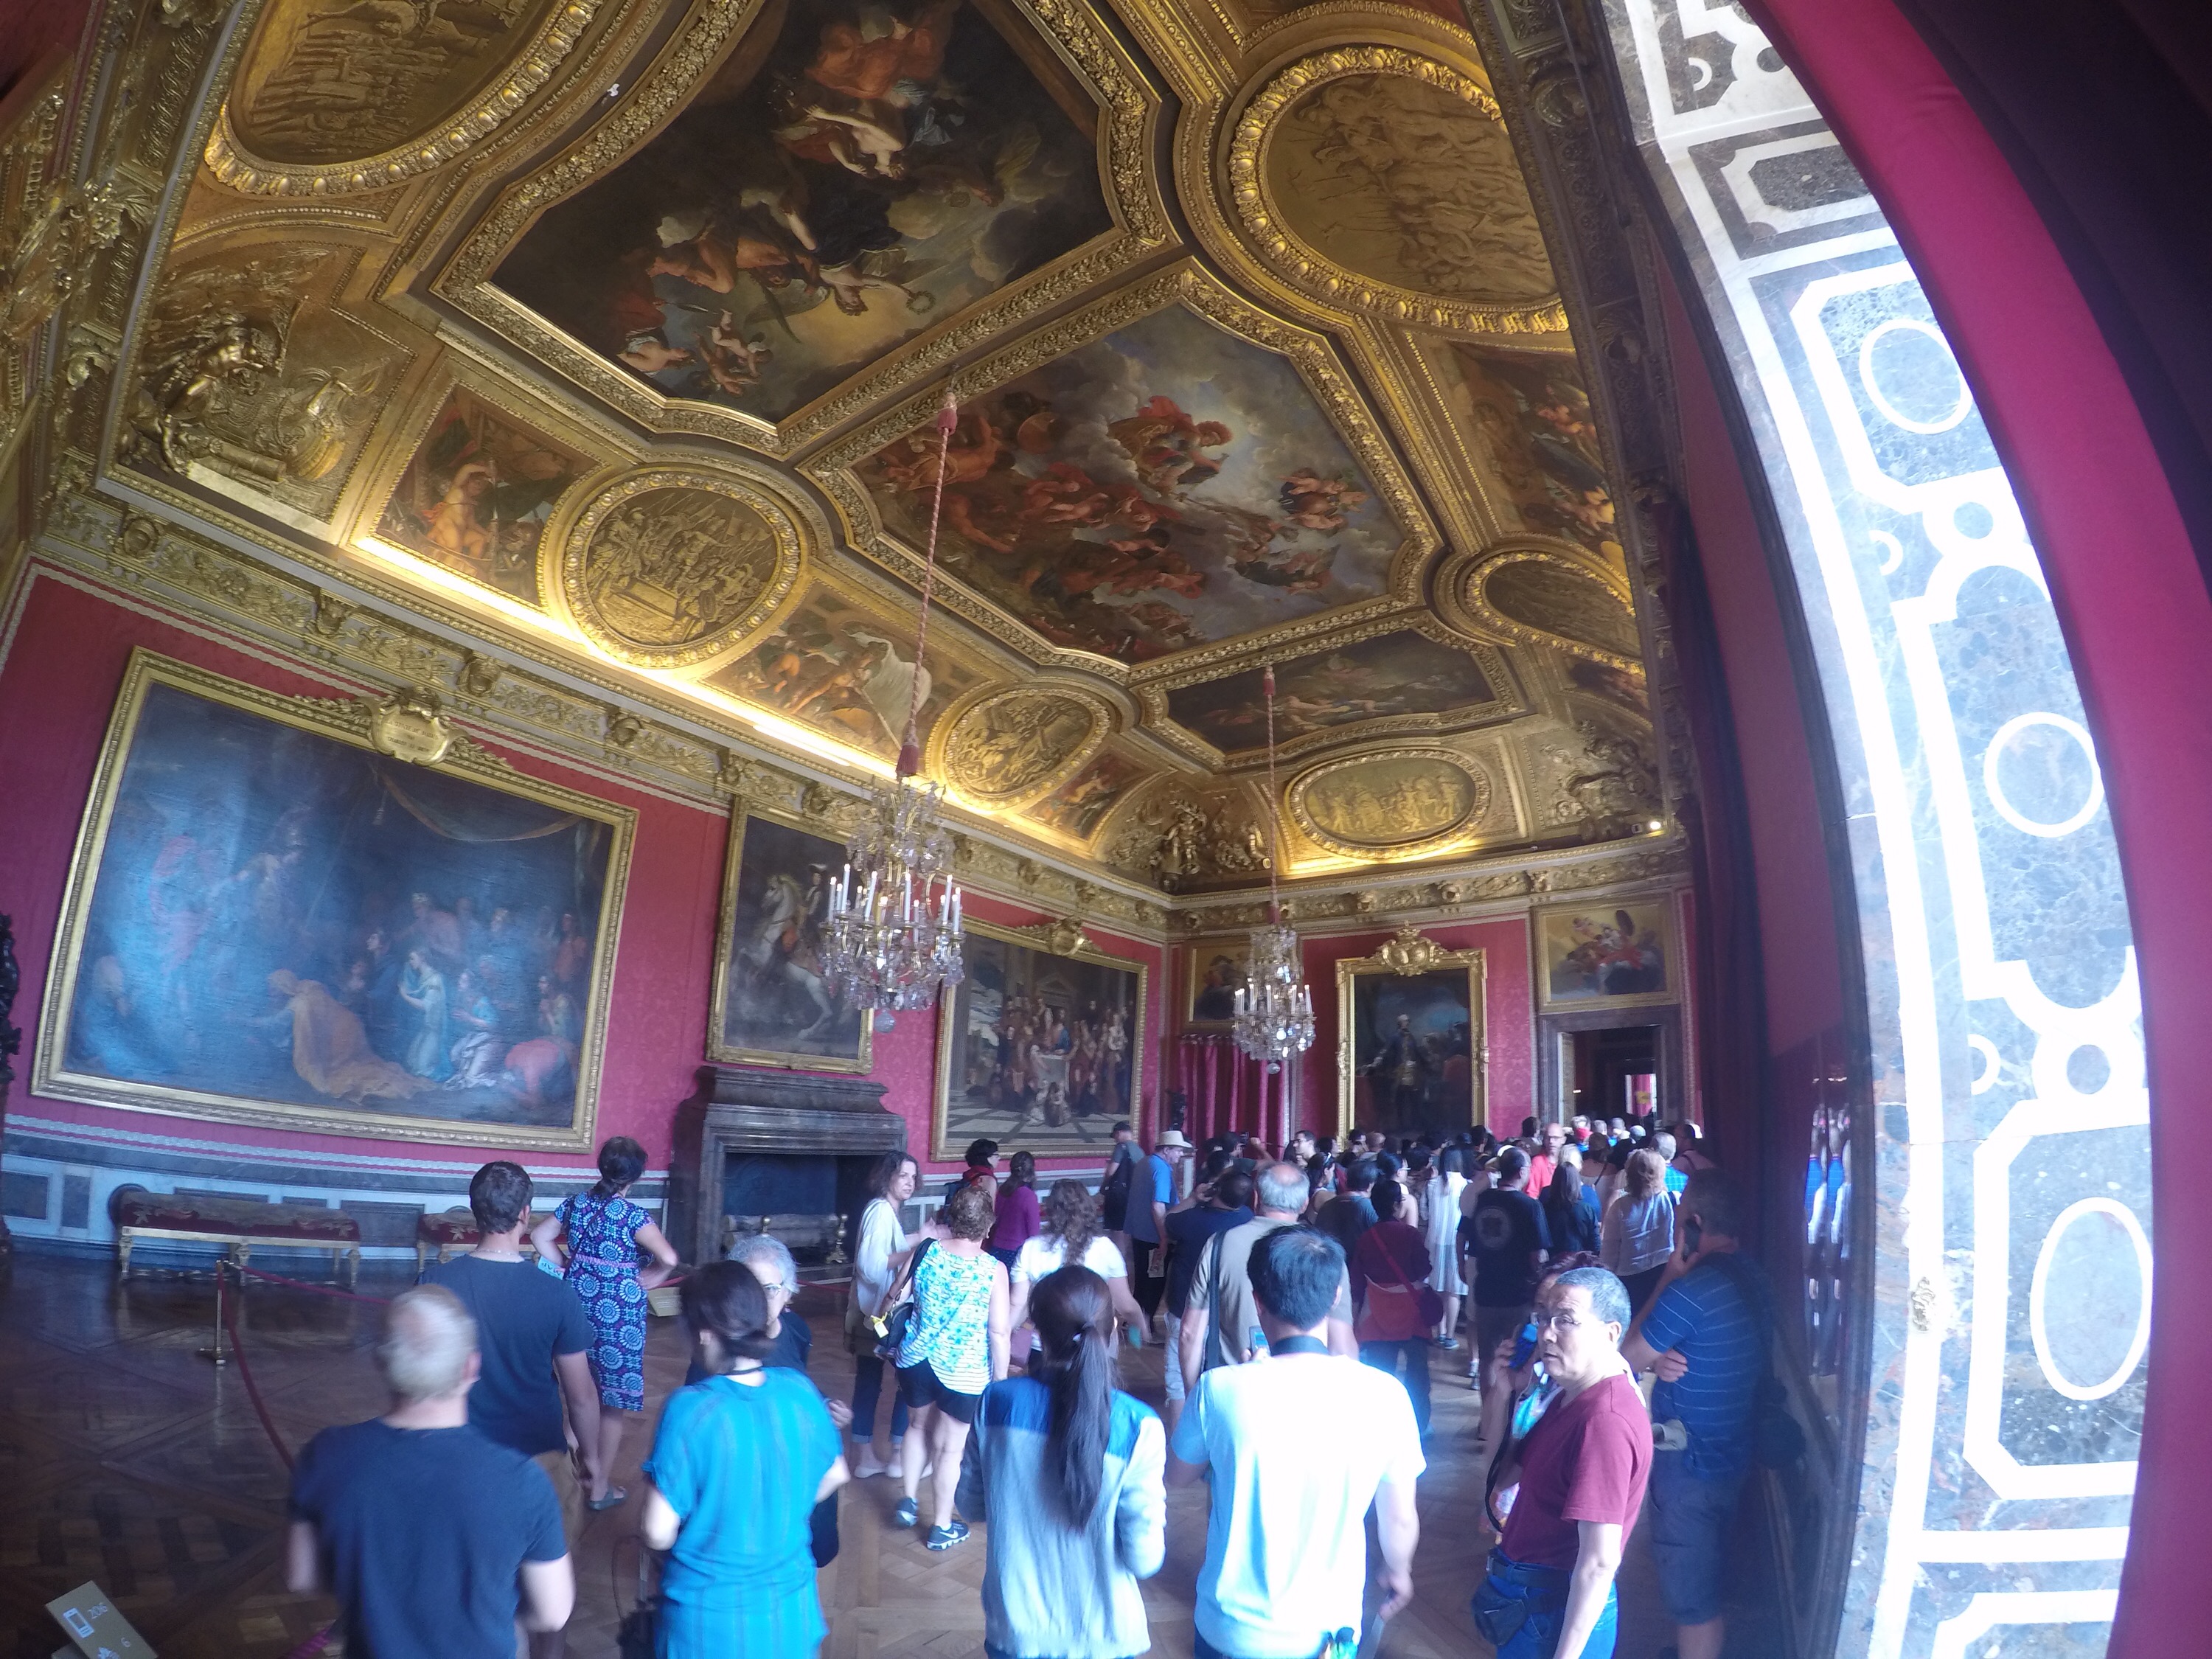 The many luxurious rooms and really elaborate ceilings and great halls!